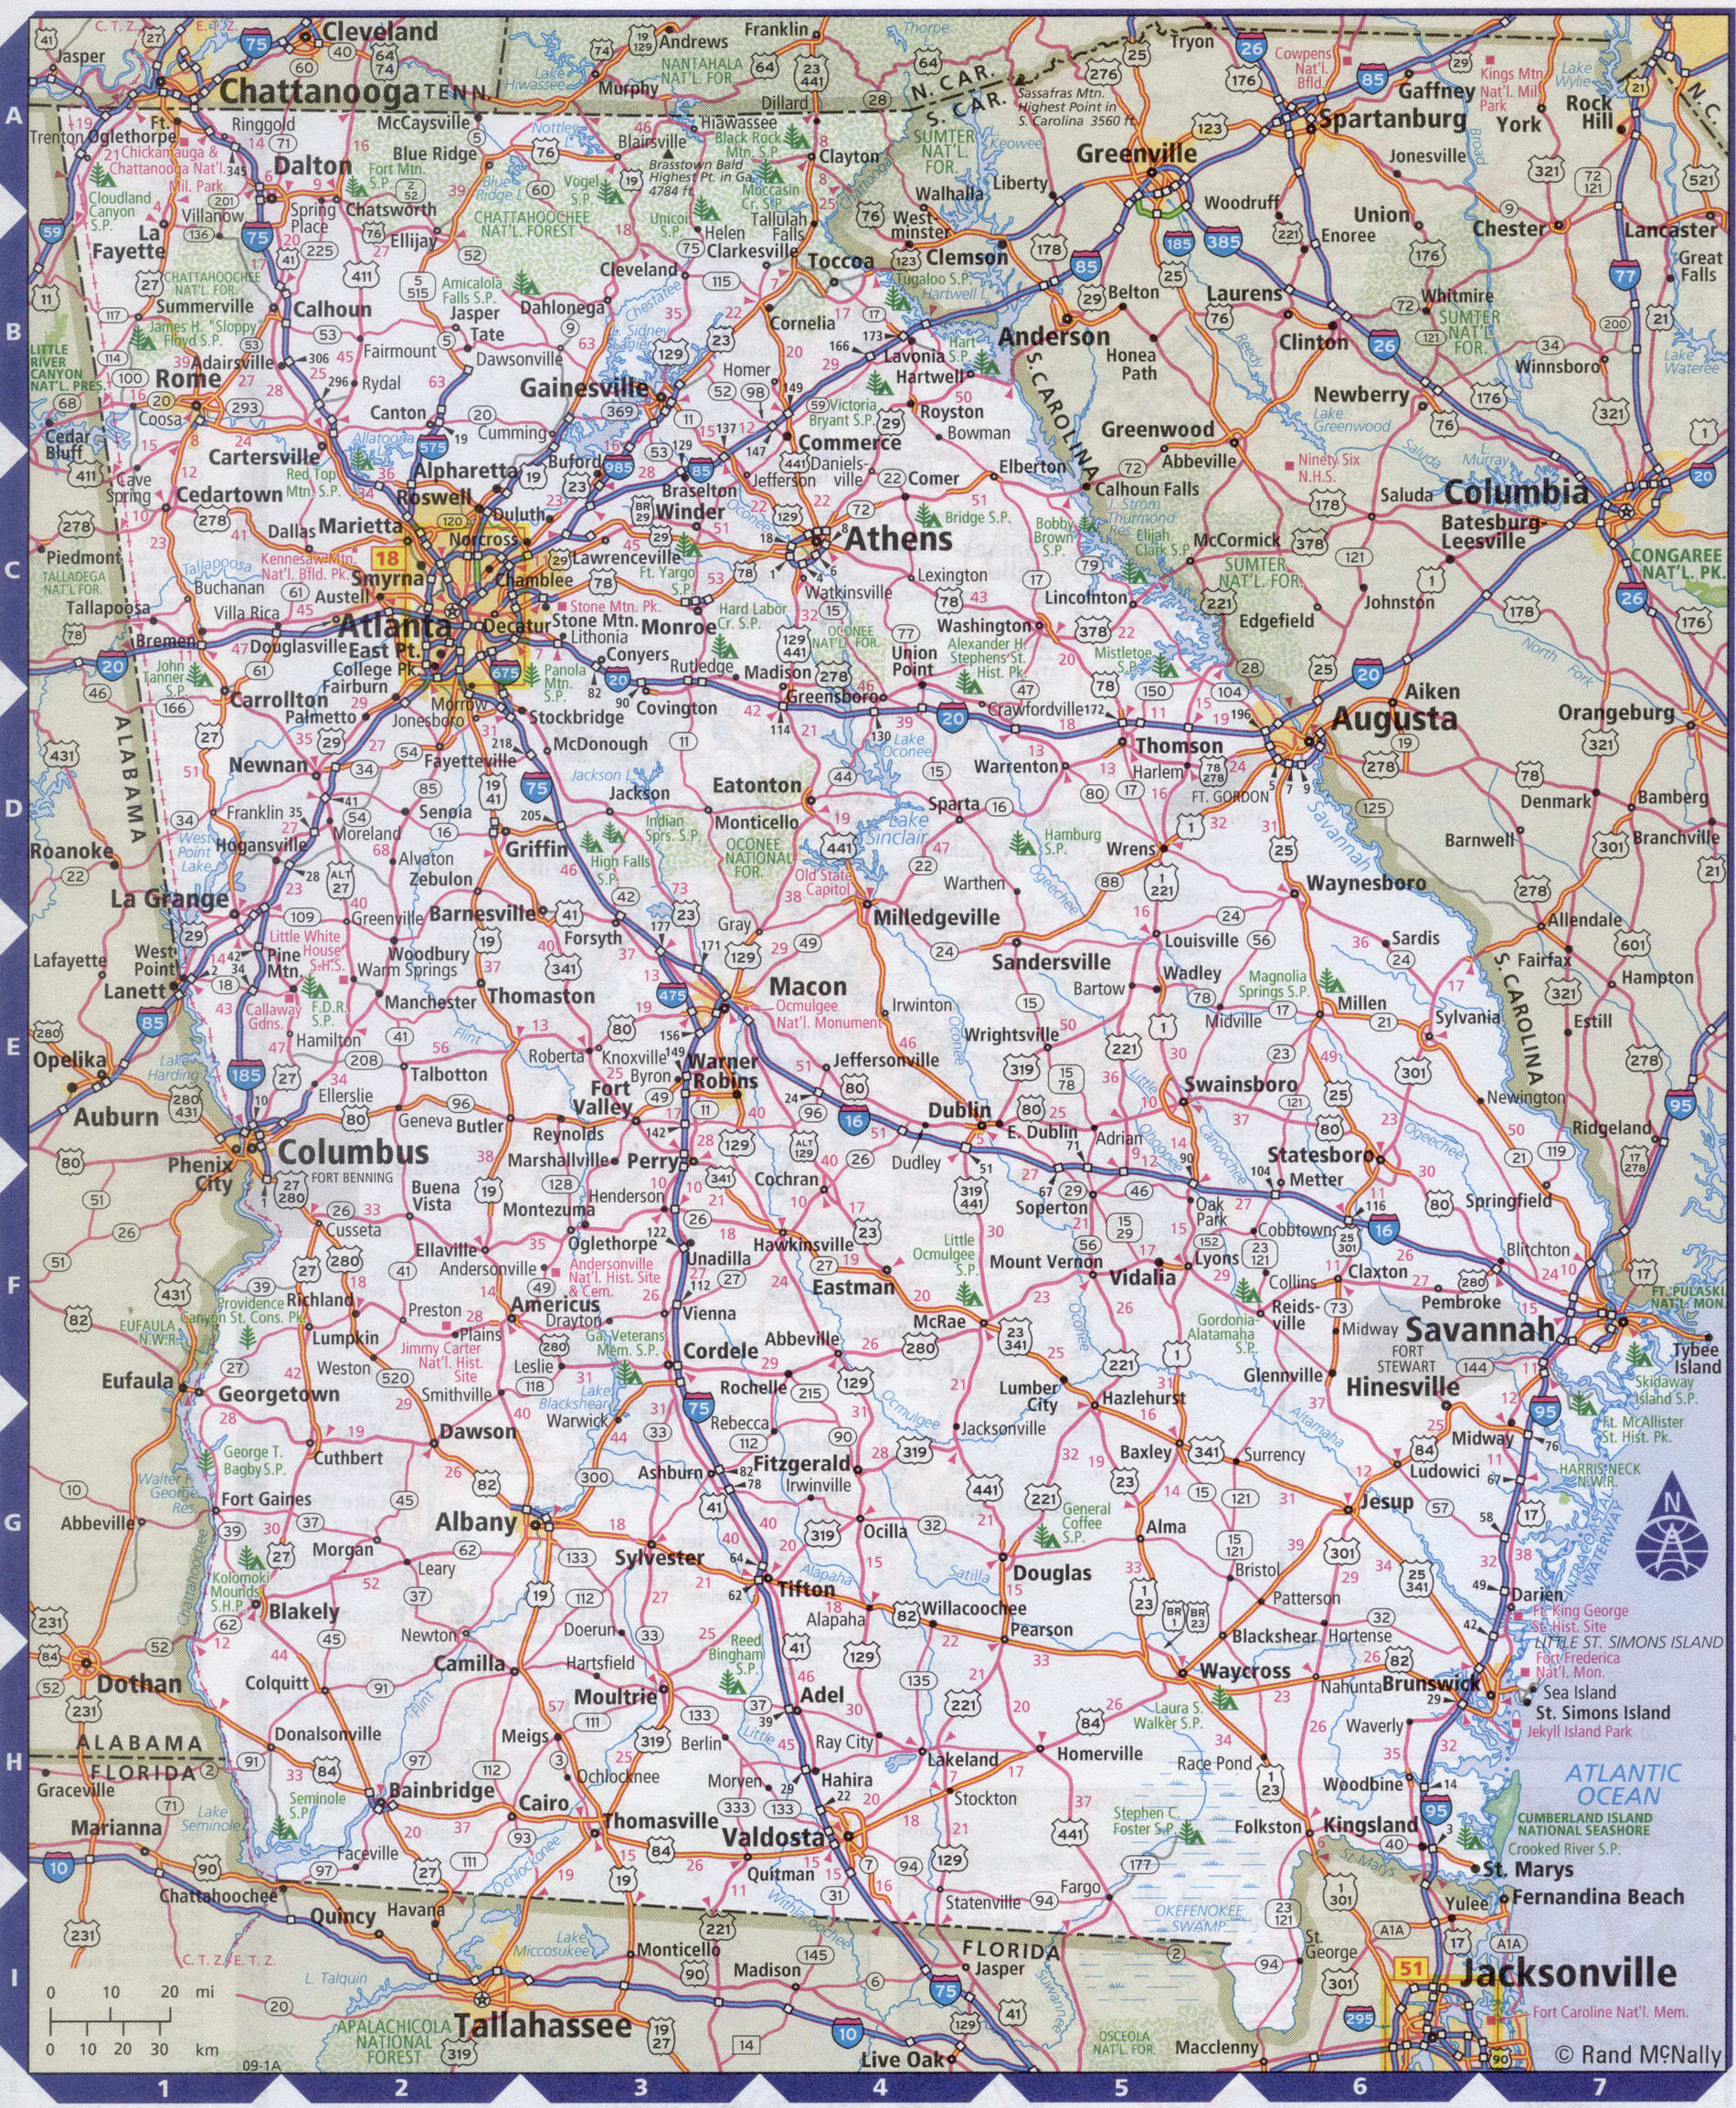 Map of Georgia (U.S. state) with highways,roads,cities,counties